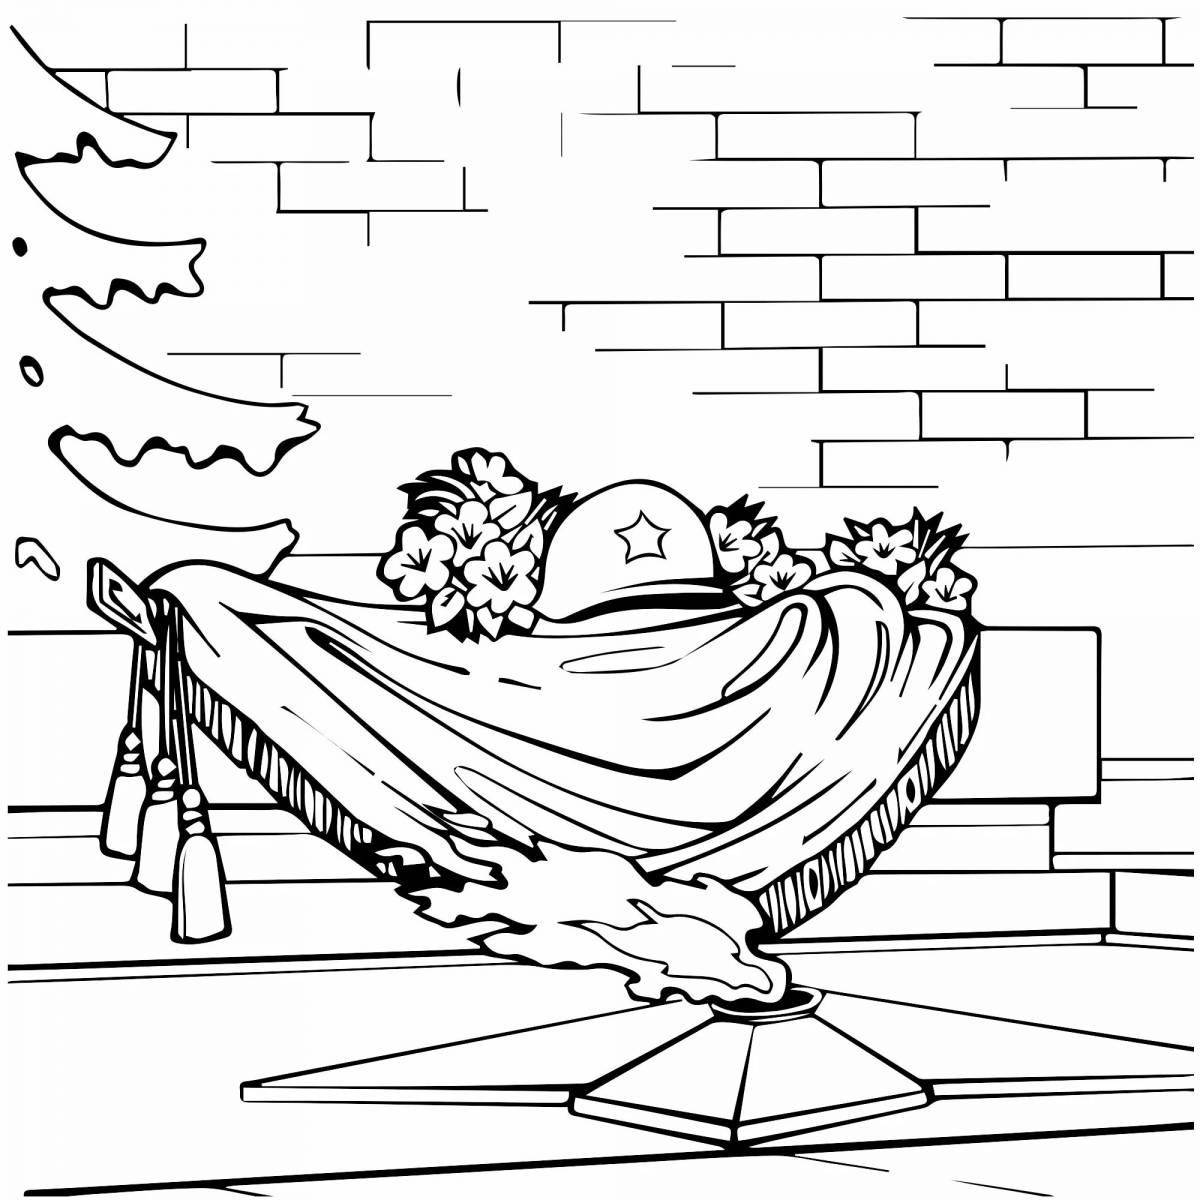 Brilliantly colored May 9 eternal flame coloring page